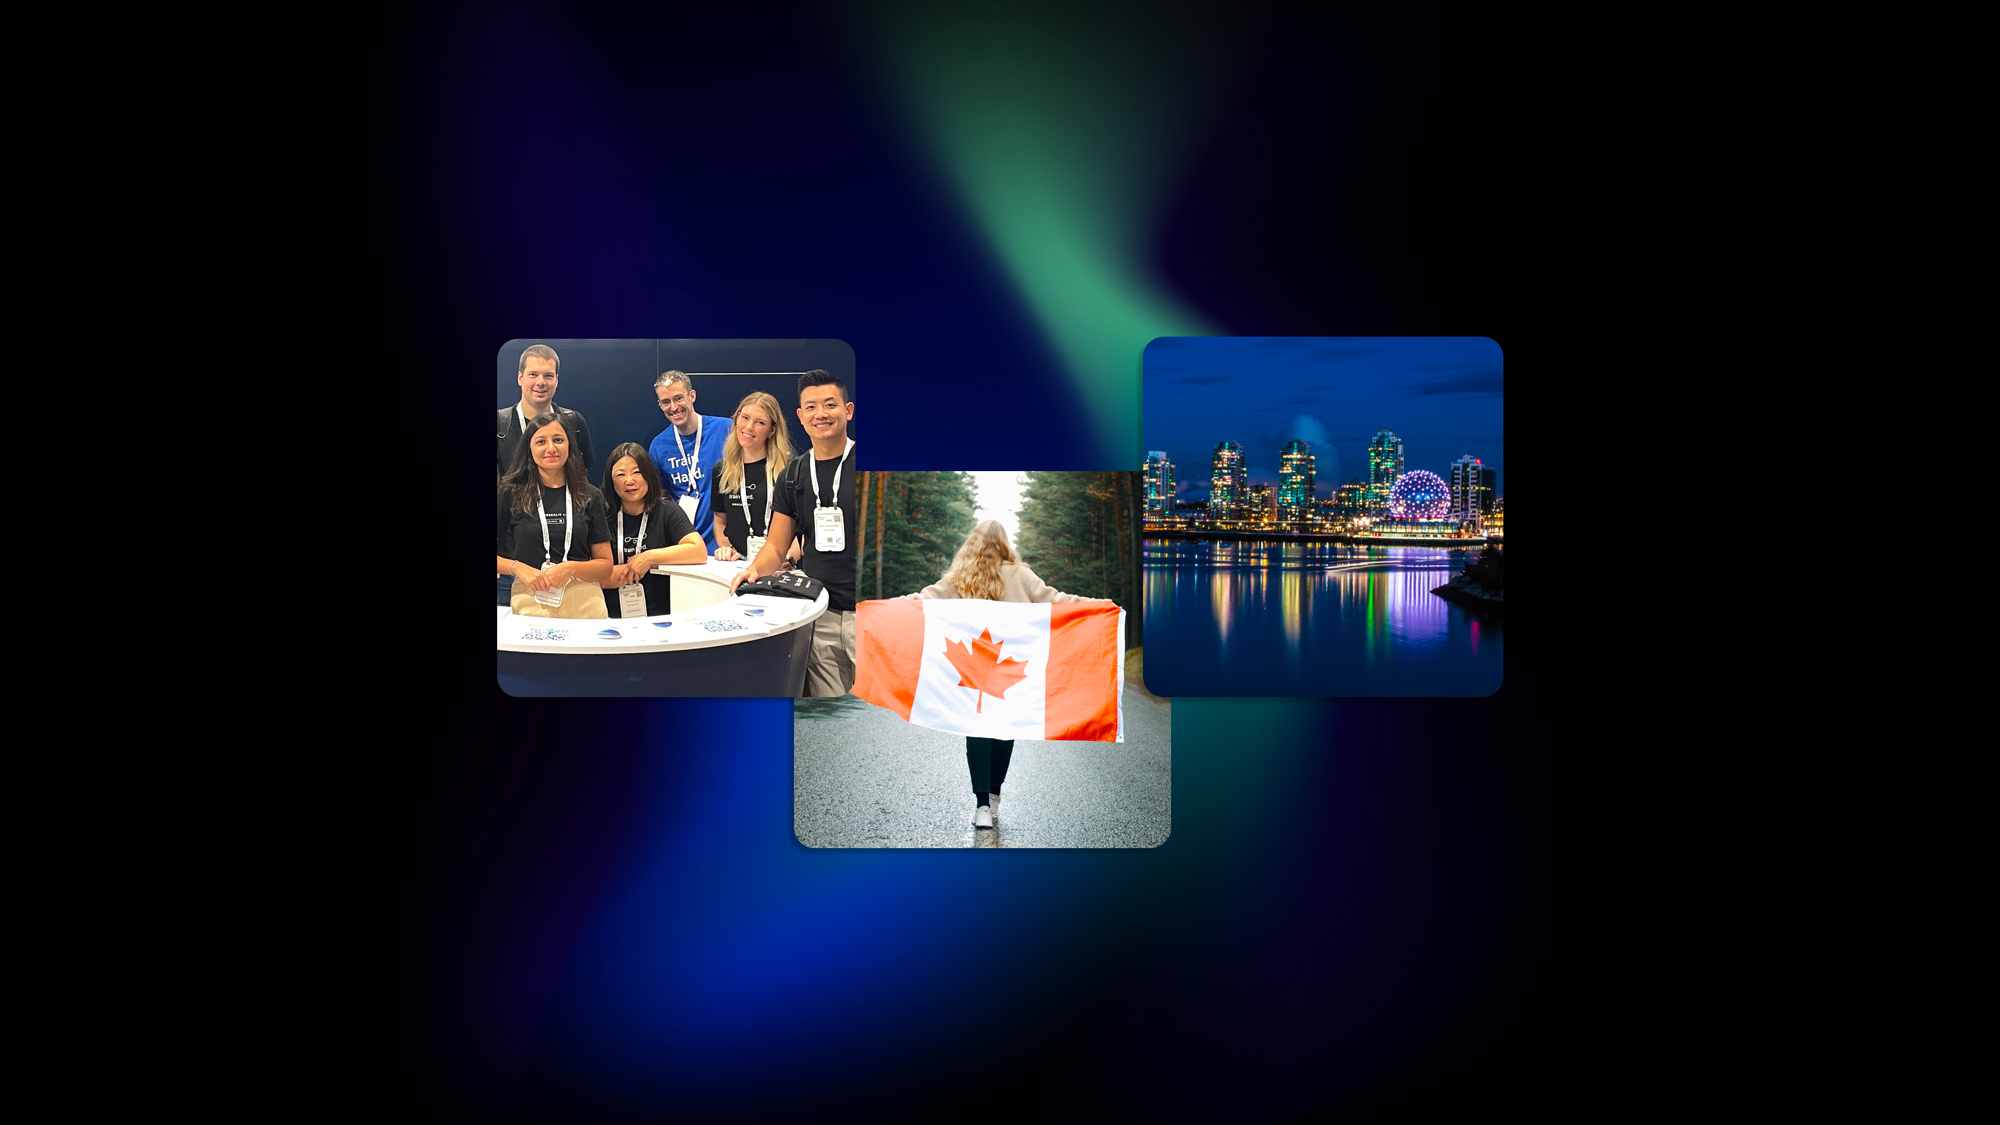 A trio of pictures, from left to right: the Borealis AI team at a conference, a woman holding a Canada flag on a forest road, and a skyline of Vancouver lit up at night.